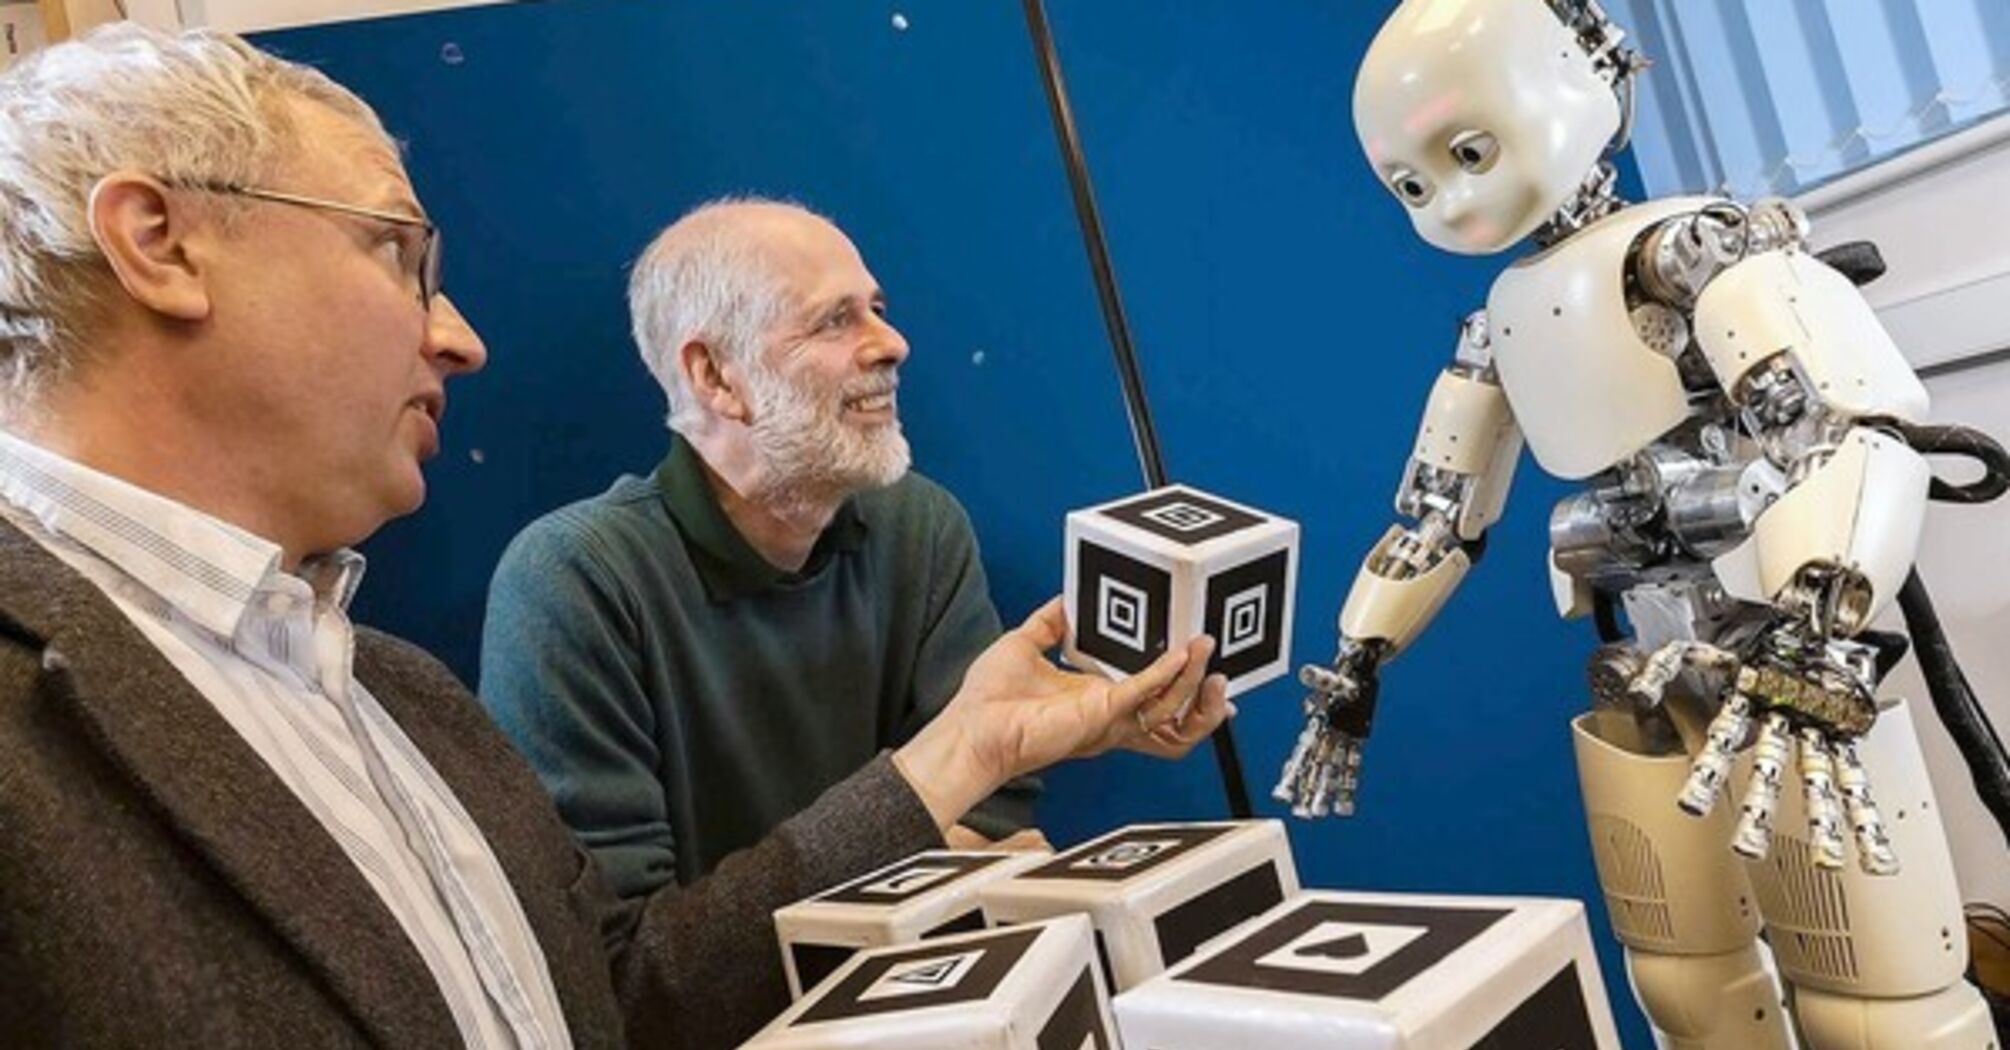 A robot that understands human speech and can learn quickly is presented